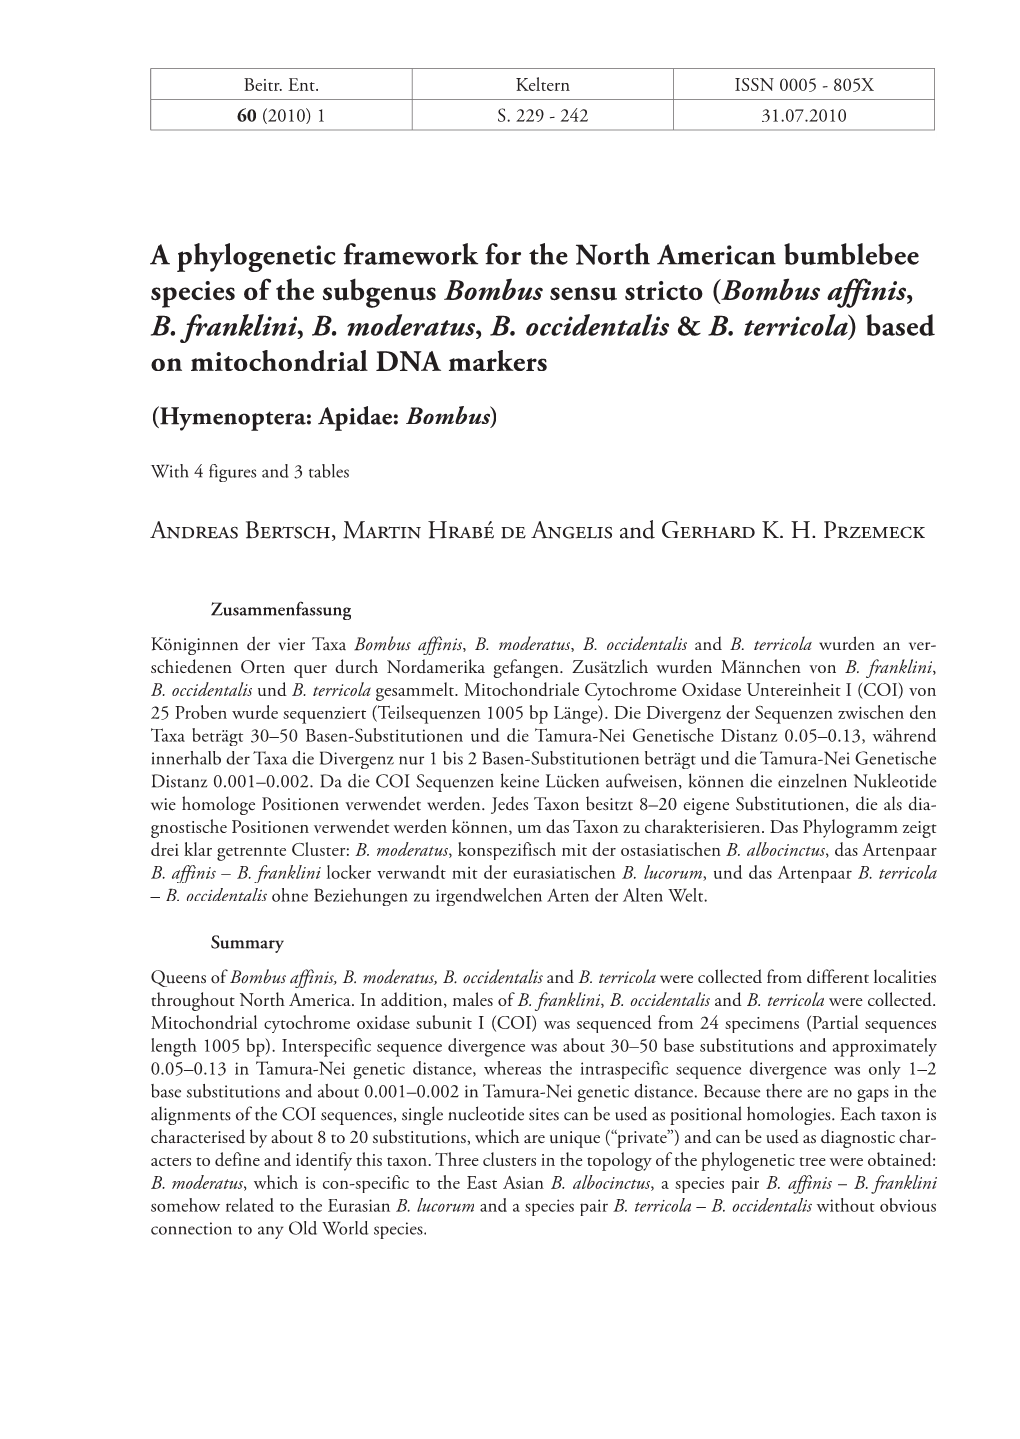 A Phylogenetic Framework for the North American Bumblebee Species of the Subgenus Bombus Ssensuensu Sstrictotricto (Bombus Affinis, B